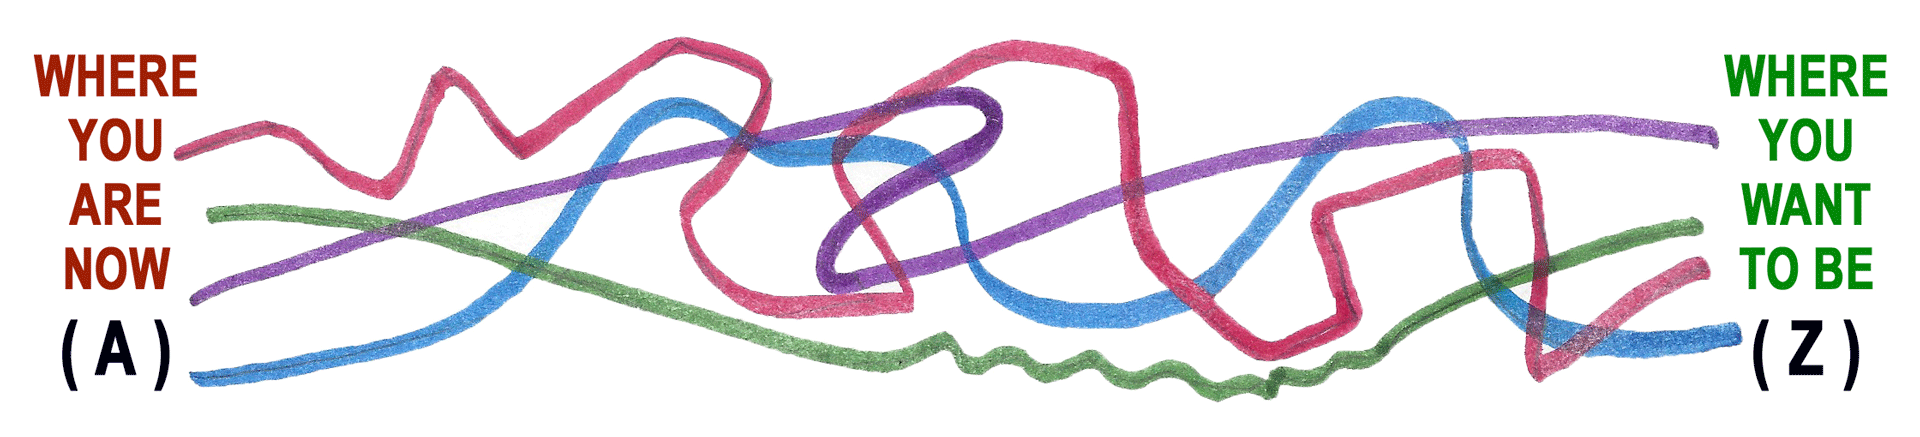 A group of colorful streamers are drawn on paper.